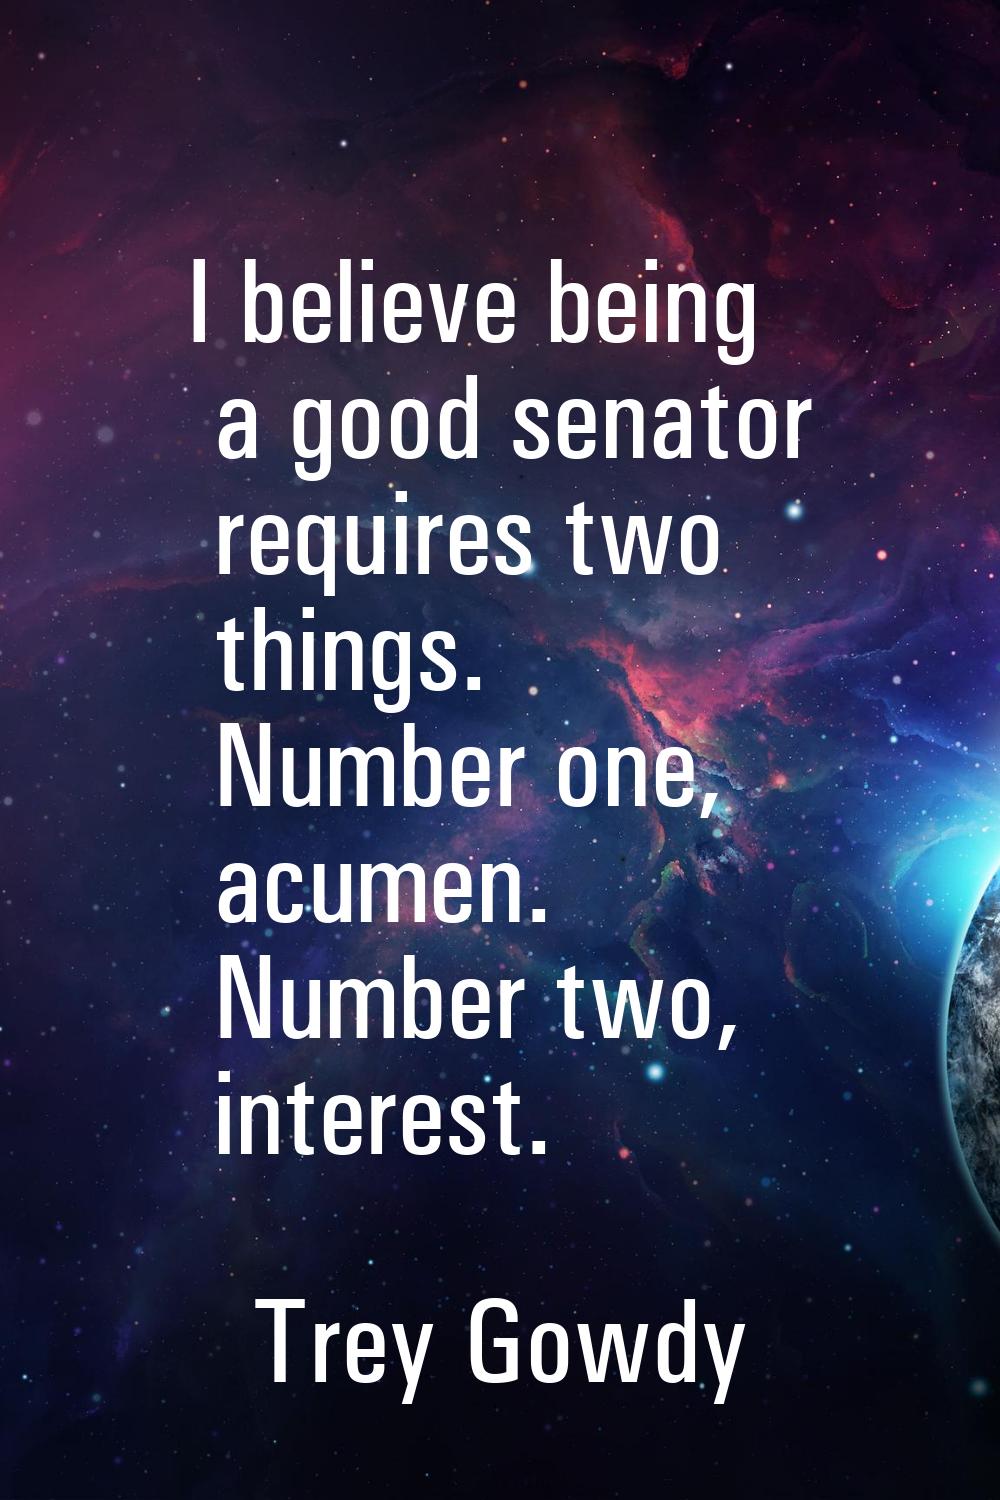 I believe being a good senator requires two things. Number one, acumen. Number two, interest.